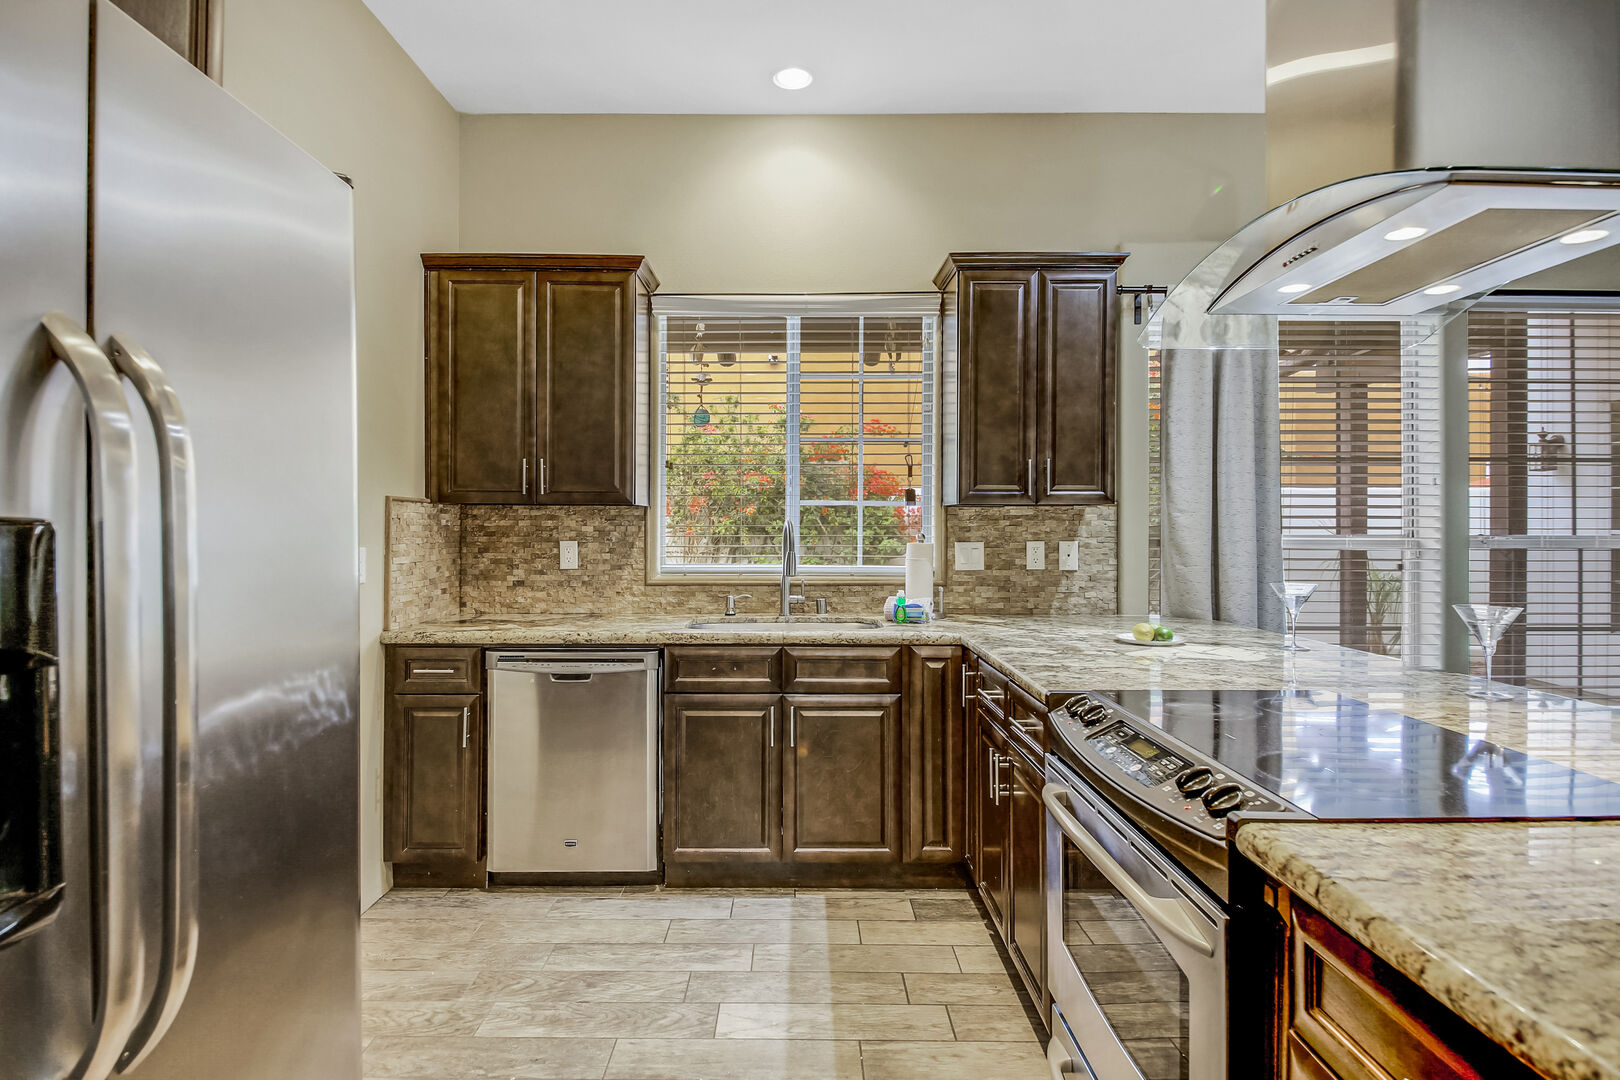 The fully-equipped kitchen features stunning stainless steel appliances.